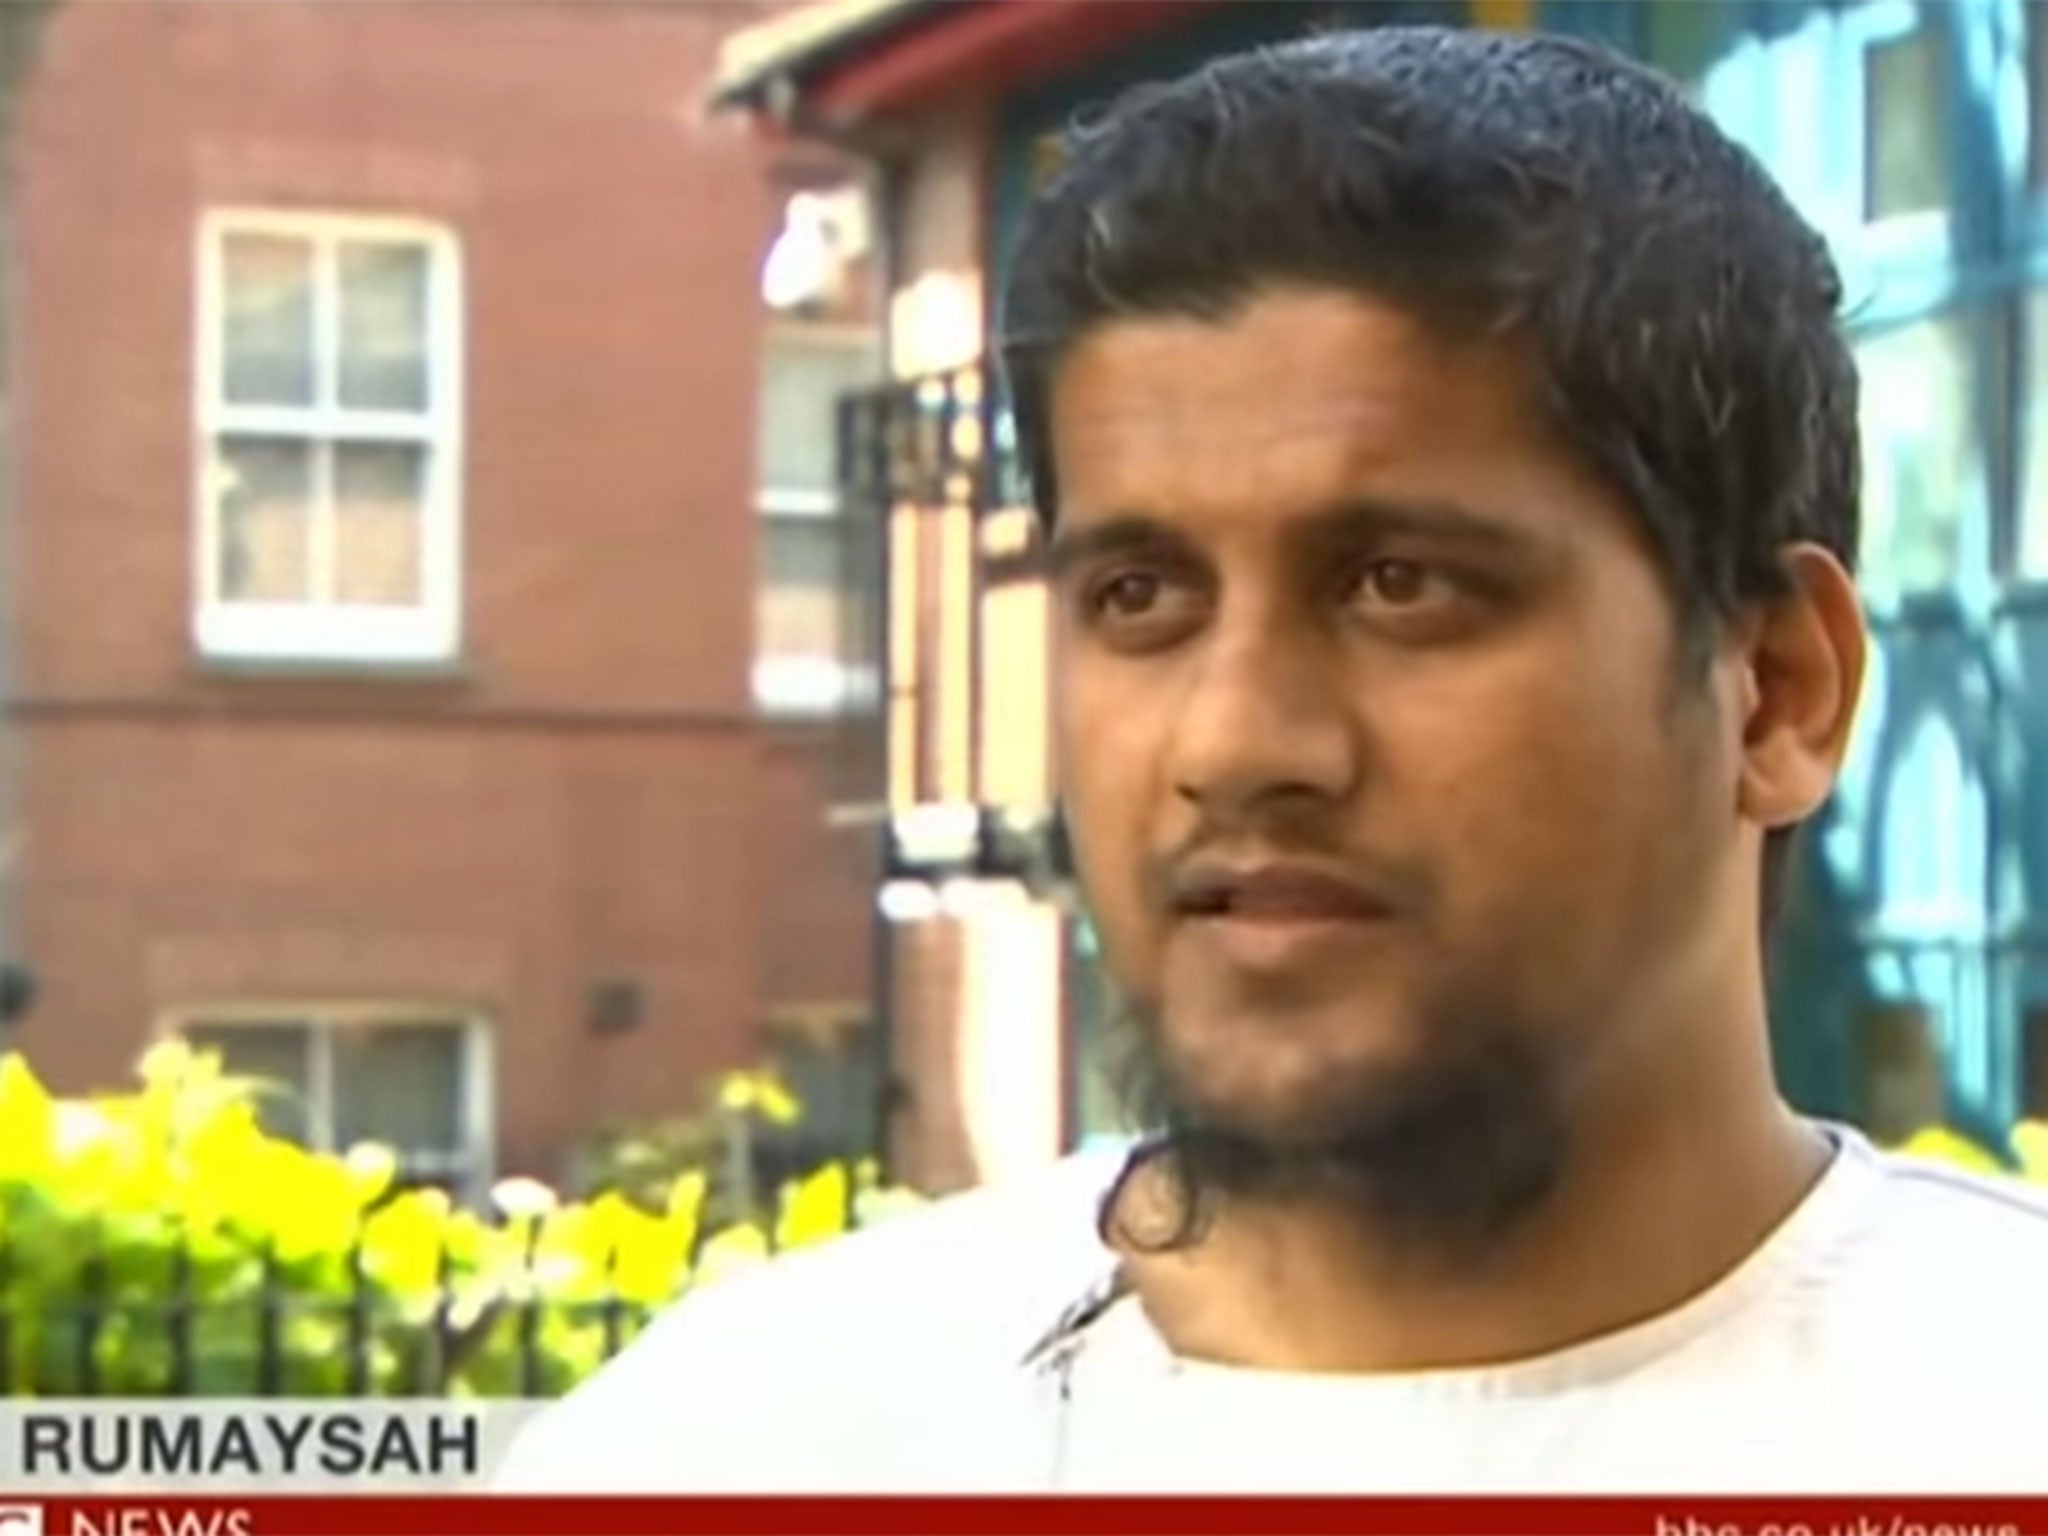 Rumaysah is interviewed extensively on BBC News in a debate on Islamic extremism